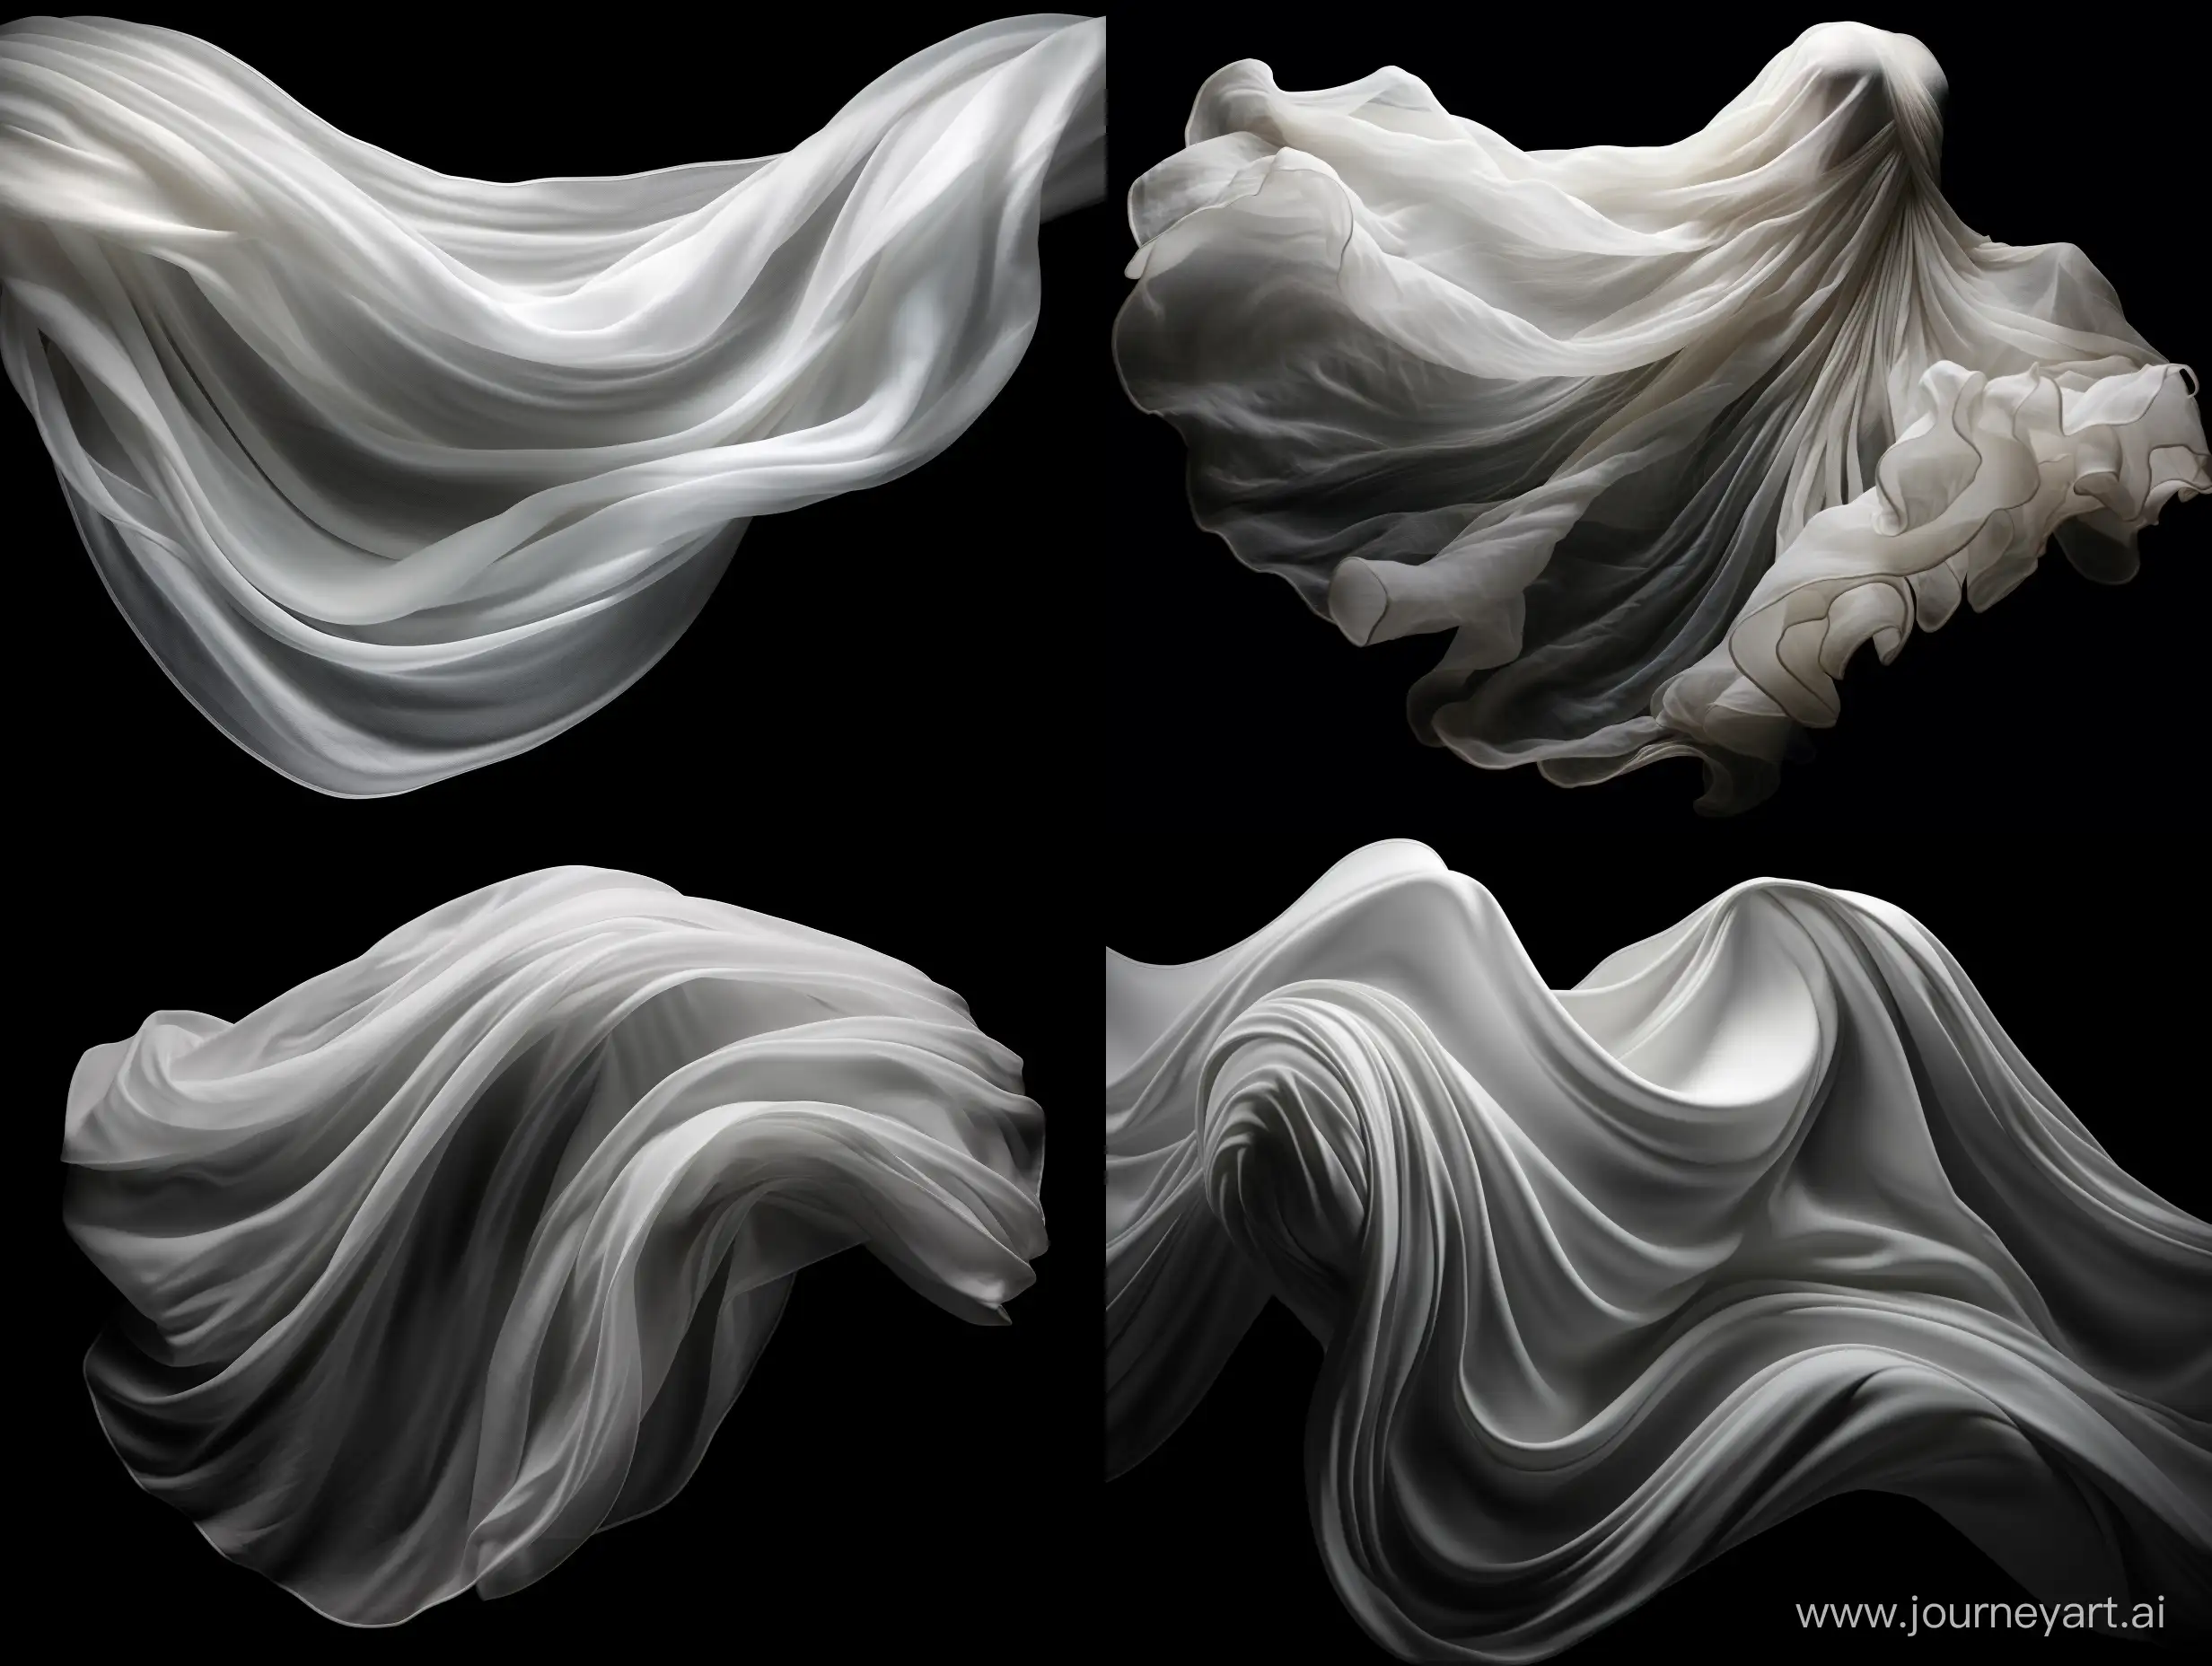 a white, real and mysterious flowing fabric, made like a real epic fantasy, which fits perfectly into the image and it is isolated on a black background.